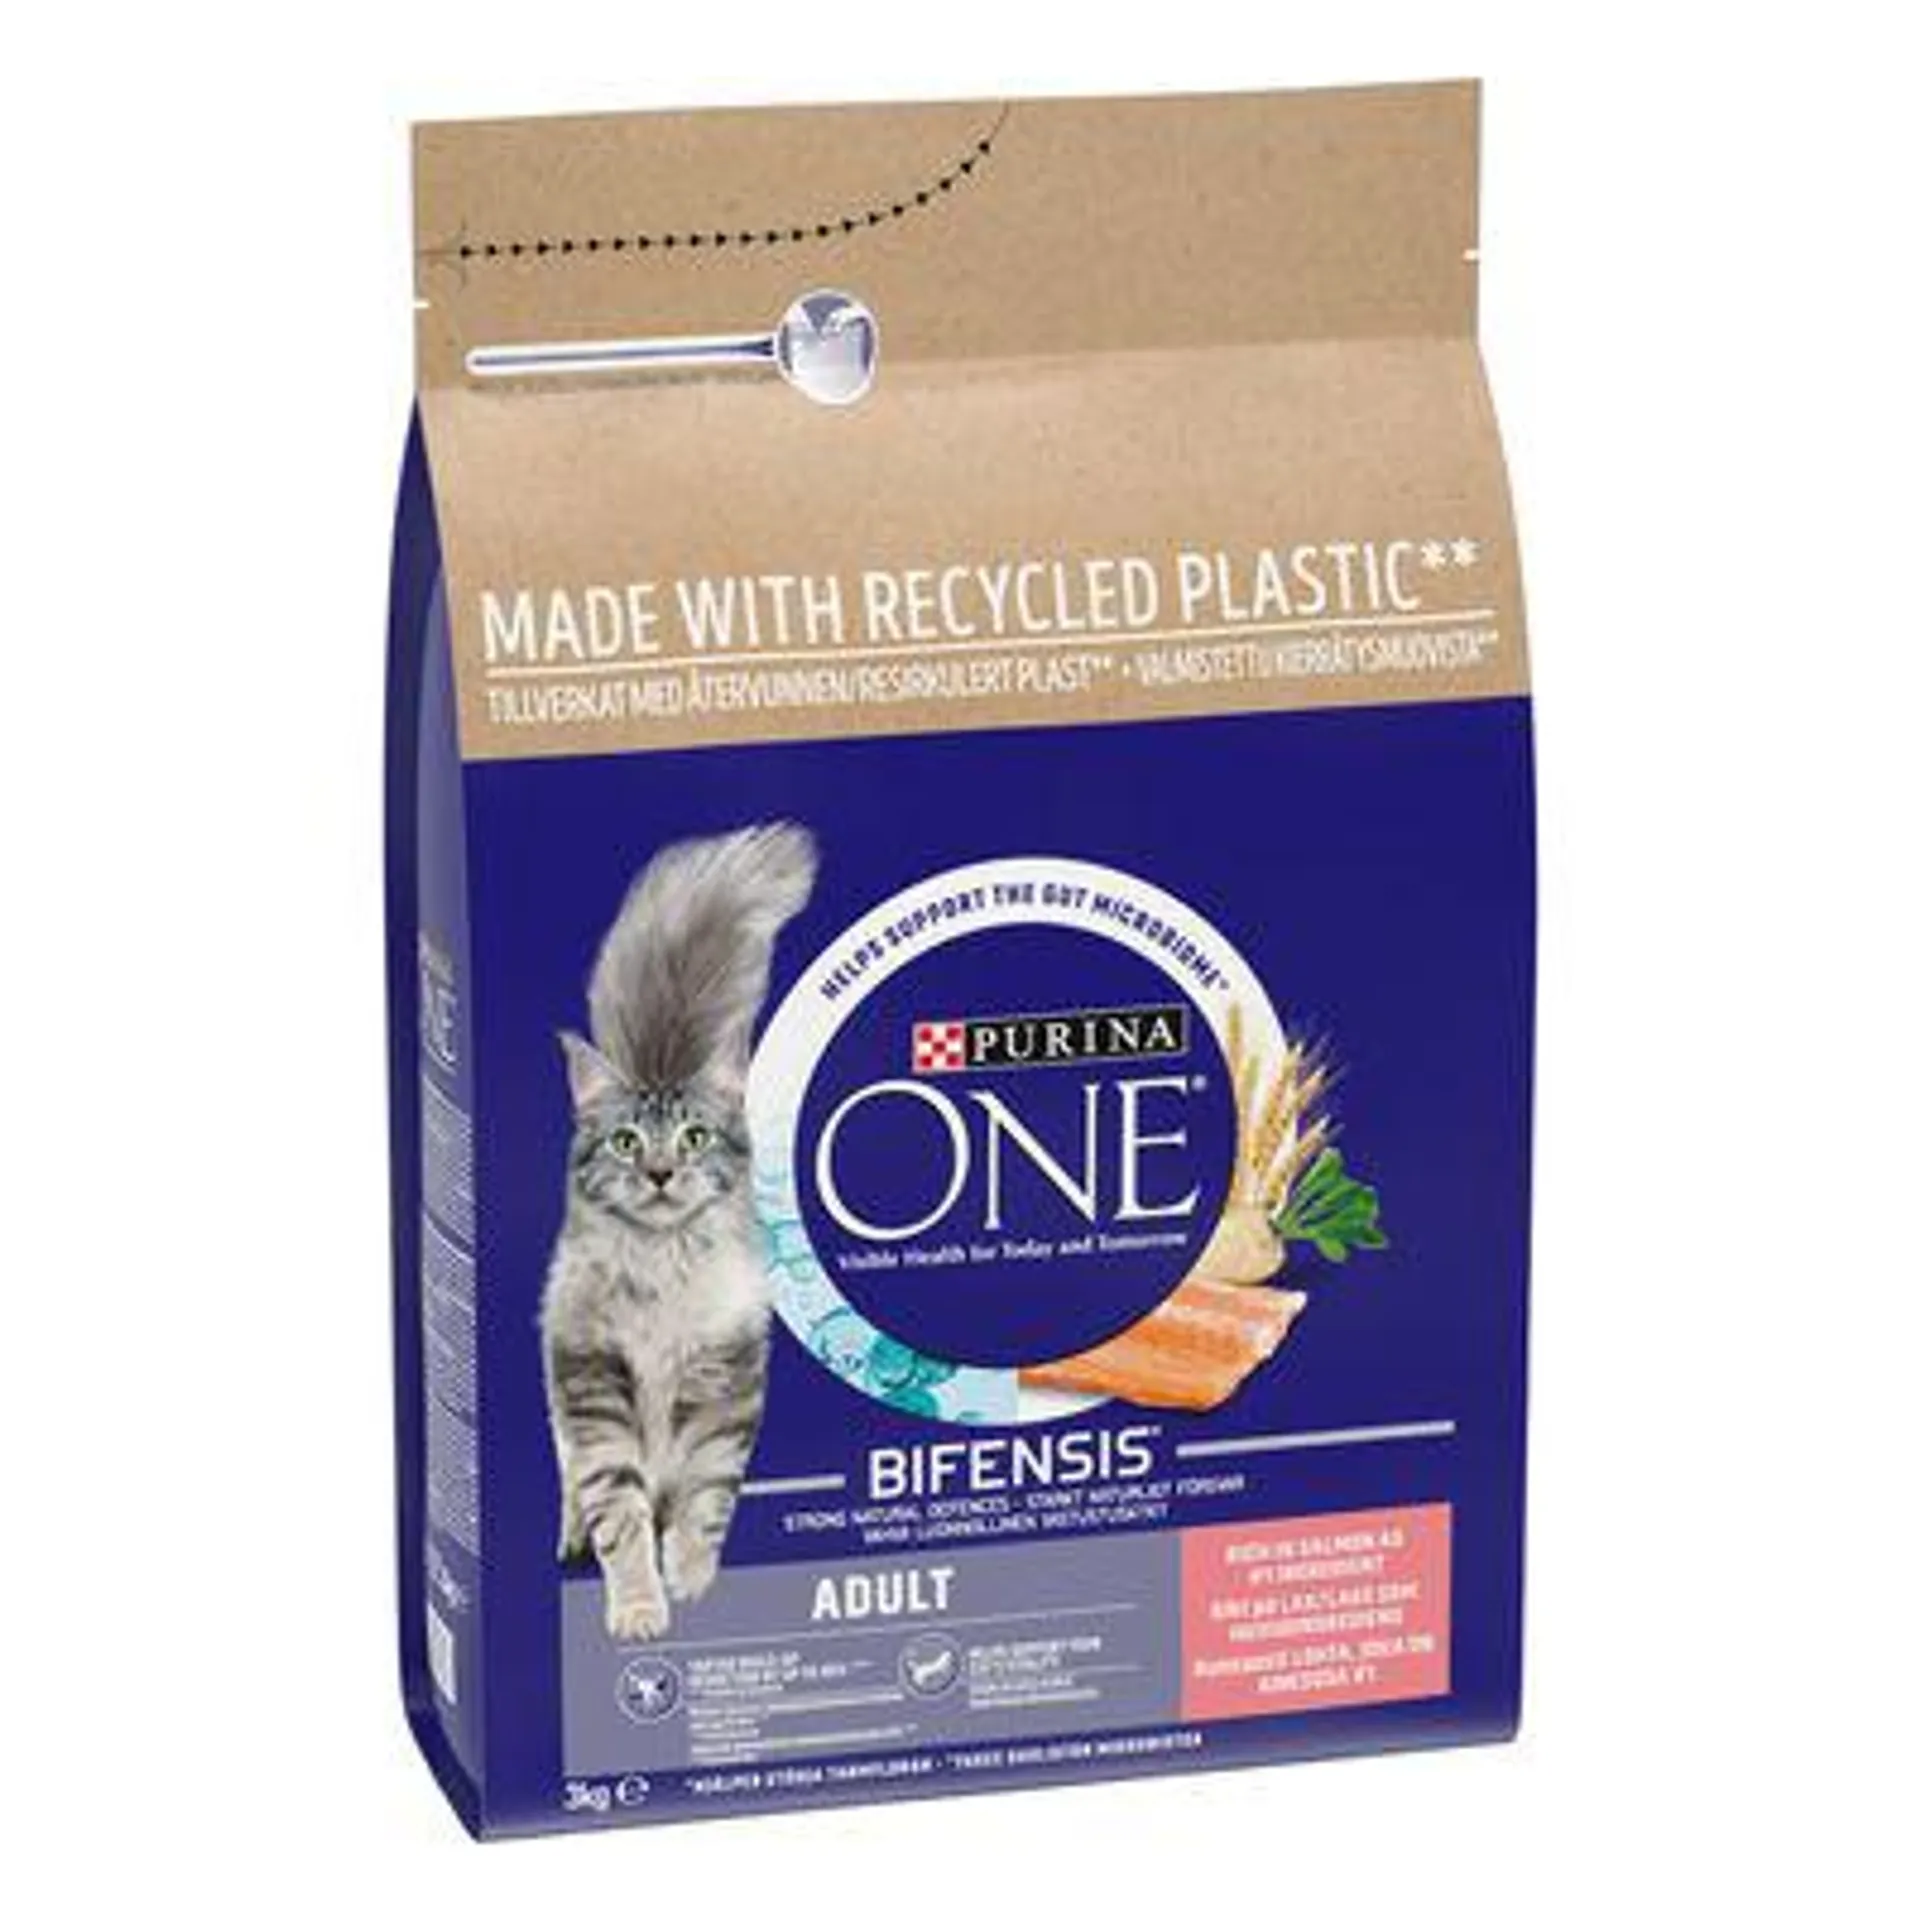 3 x 2.8kg/3kg Purina ONE Dry Cat Food - 15% Off! *